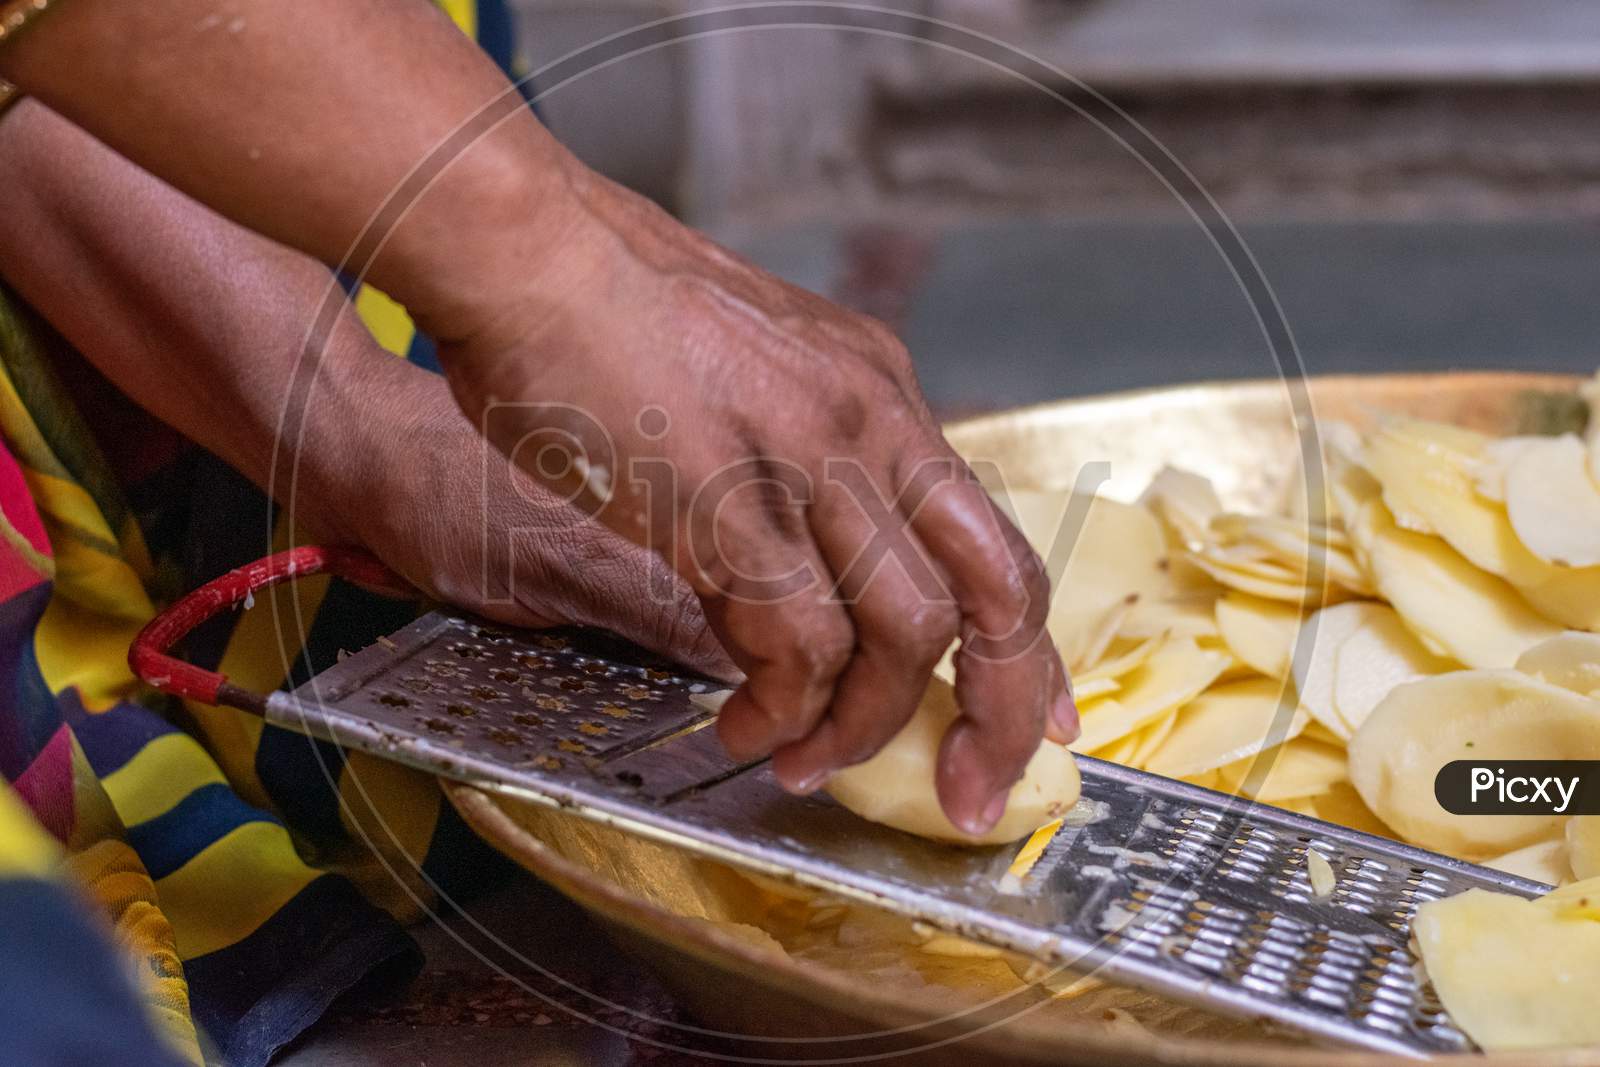 A woman prepares potato chips using chips maker at home